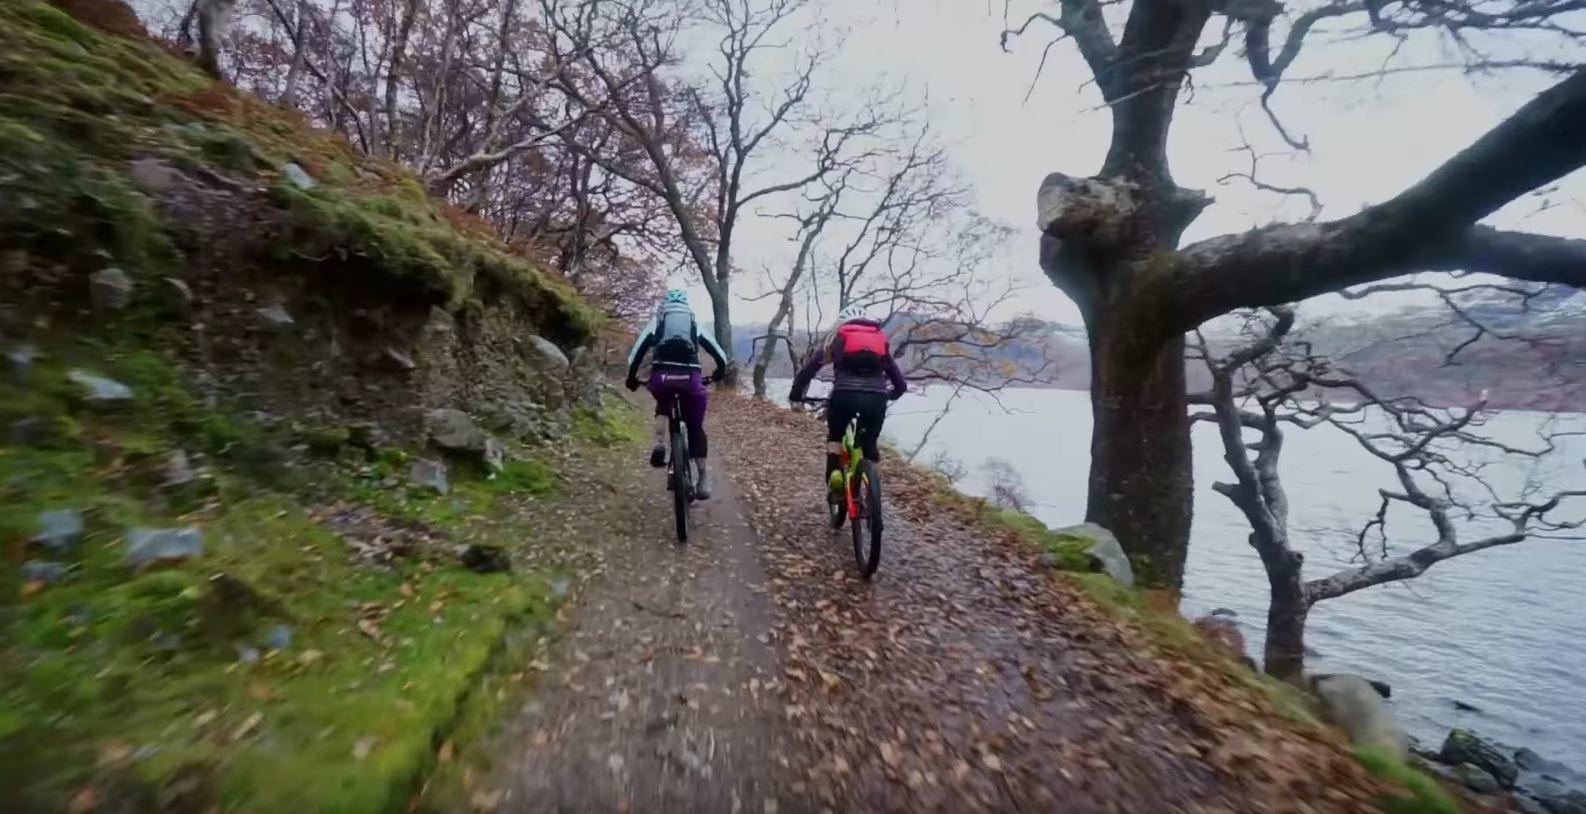 Nothing like a mild winter ride. Hannah Barnes hits the trails with her Mum.